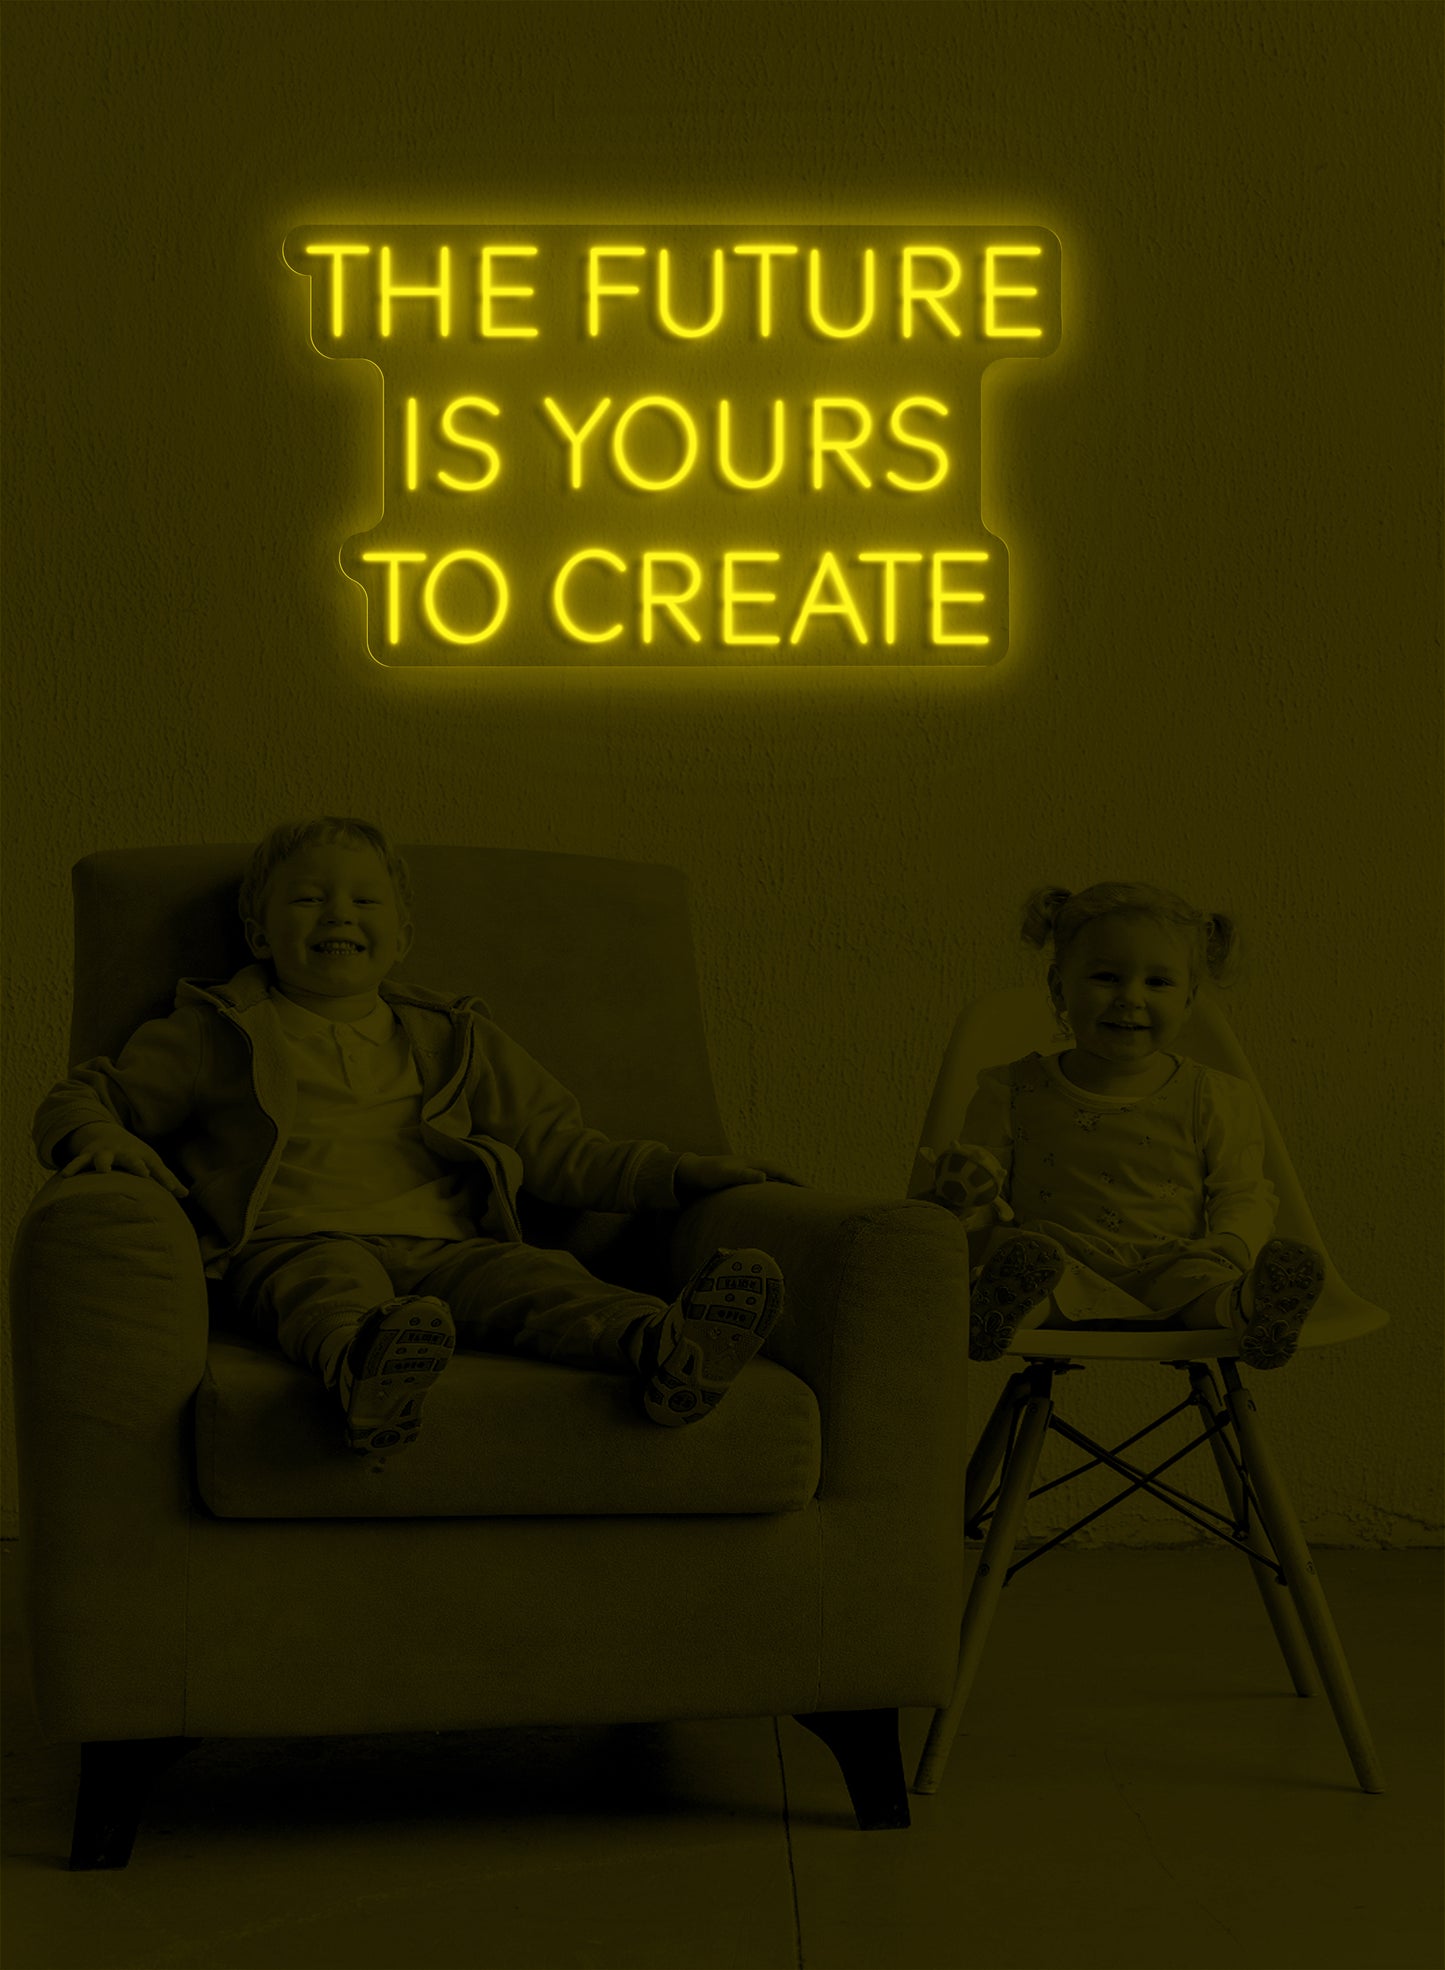 The Future is yours